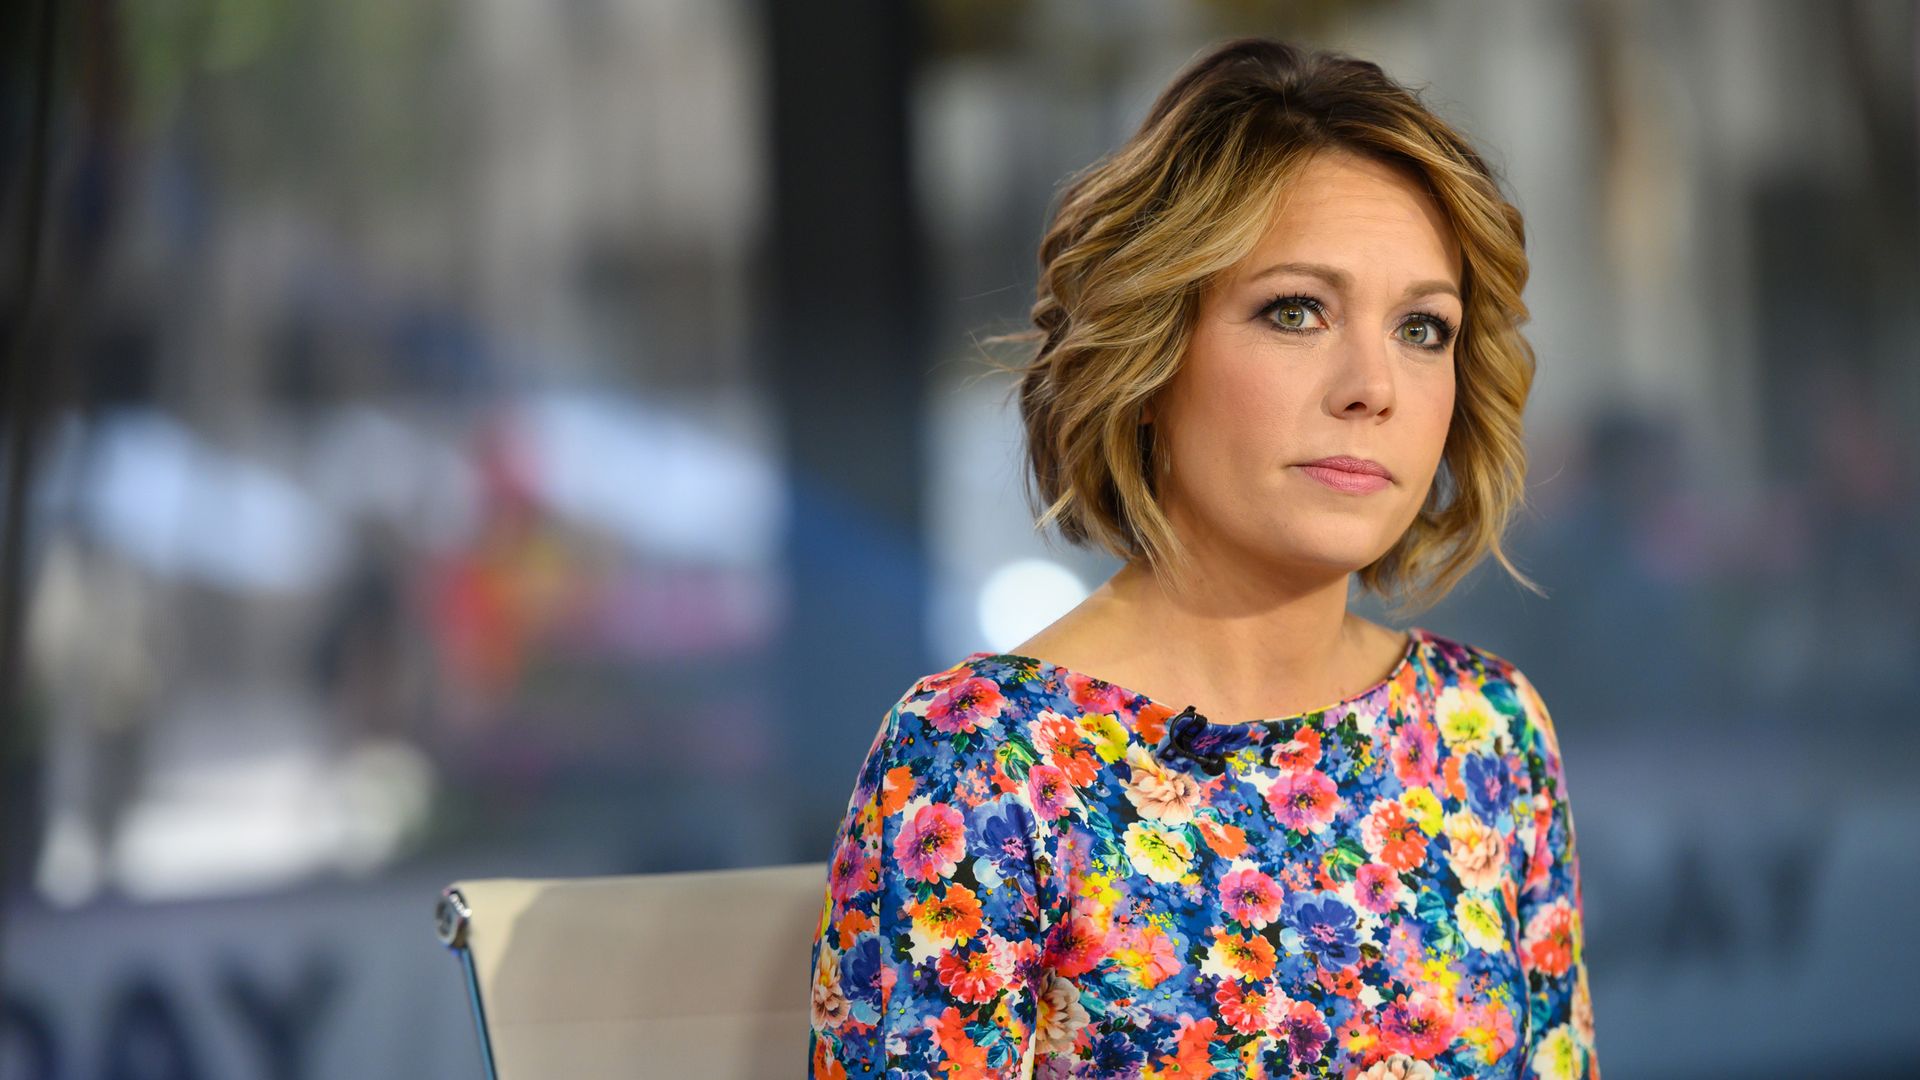 Today's Dylan Dreyer steps in to help co-star - and it's not the first time